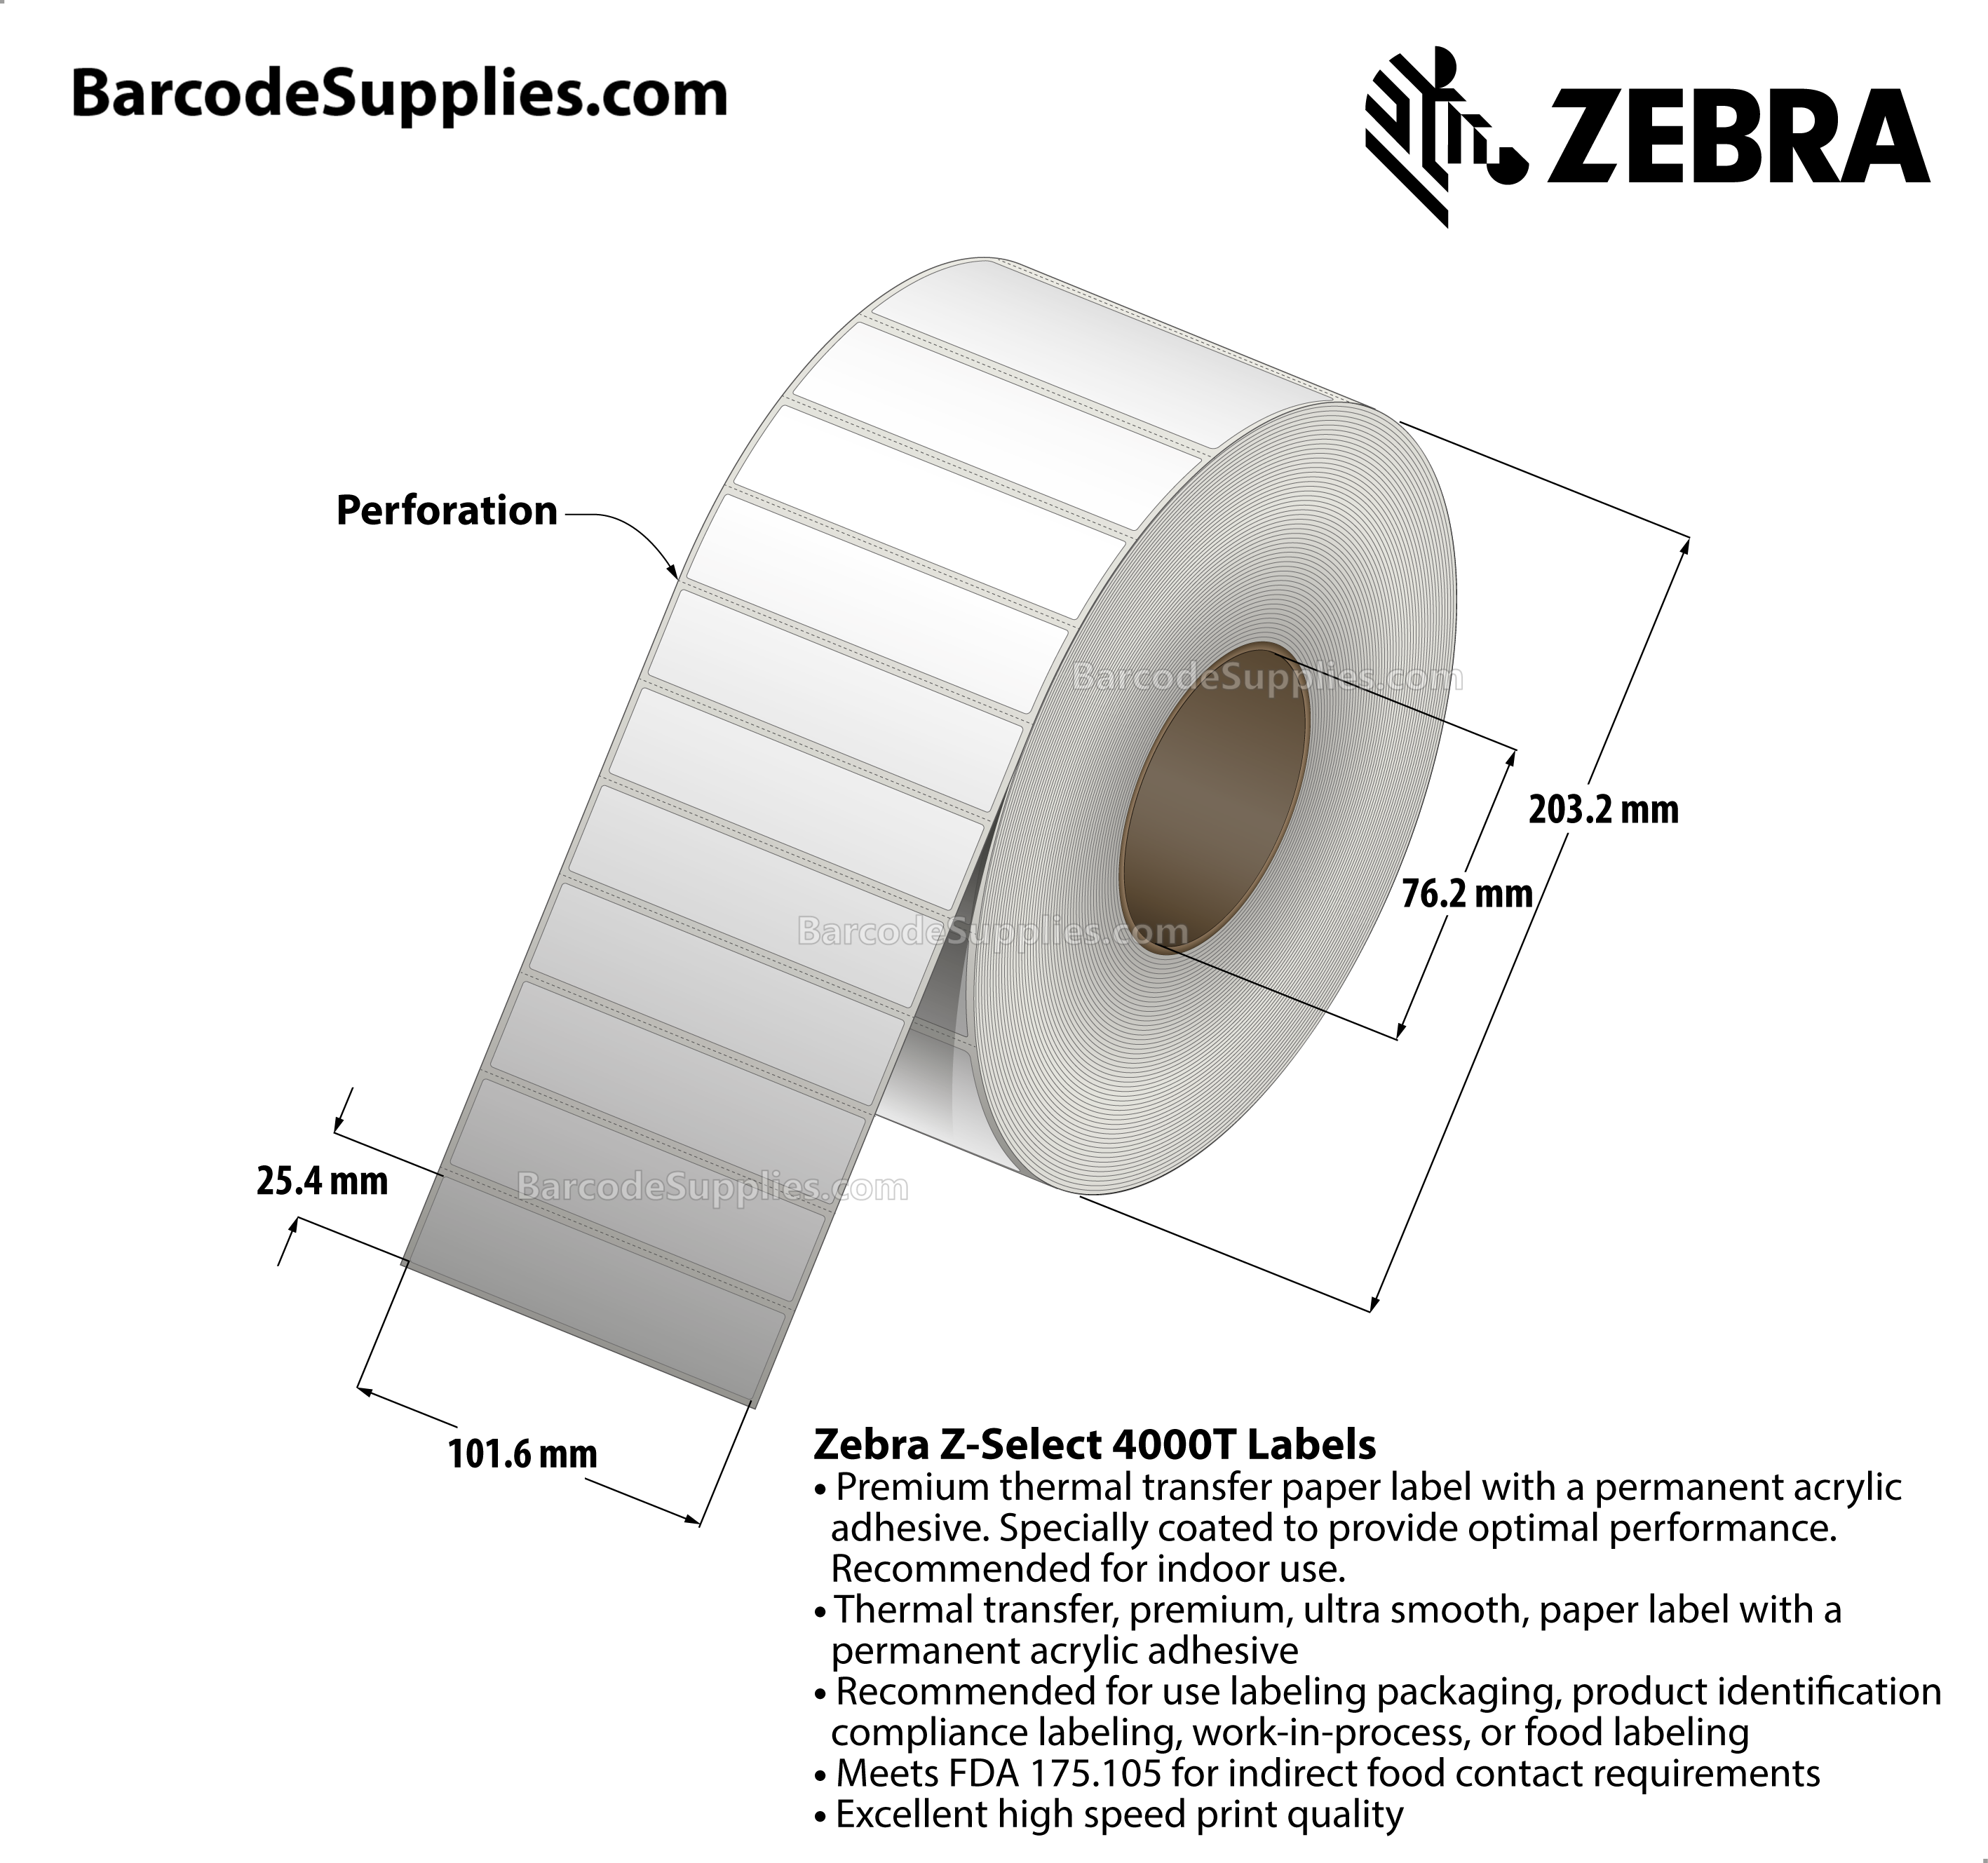 4 x 1 Thermal Transfer White Z-Select 4000T Labels With Permanent Adhesive - Perforated - 4970 Labels Per Roll - Carton Of 4 Rolls - 19880 Labels Total - MPN: 92071